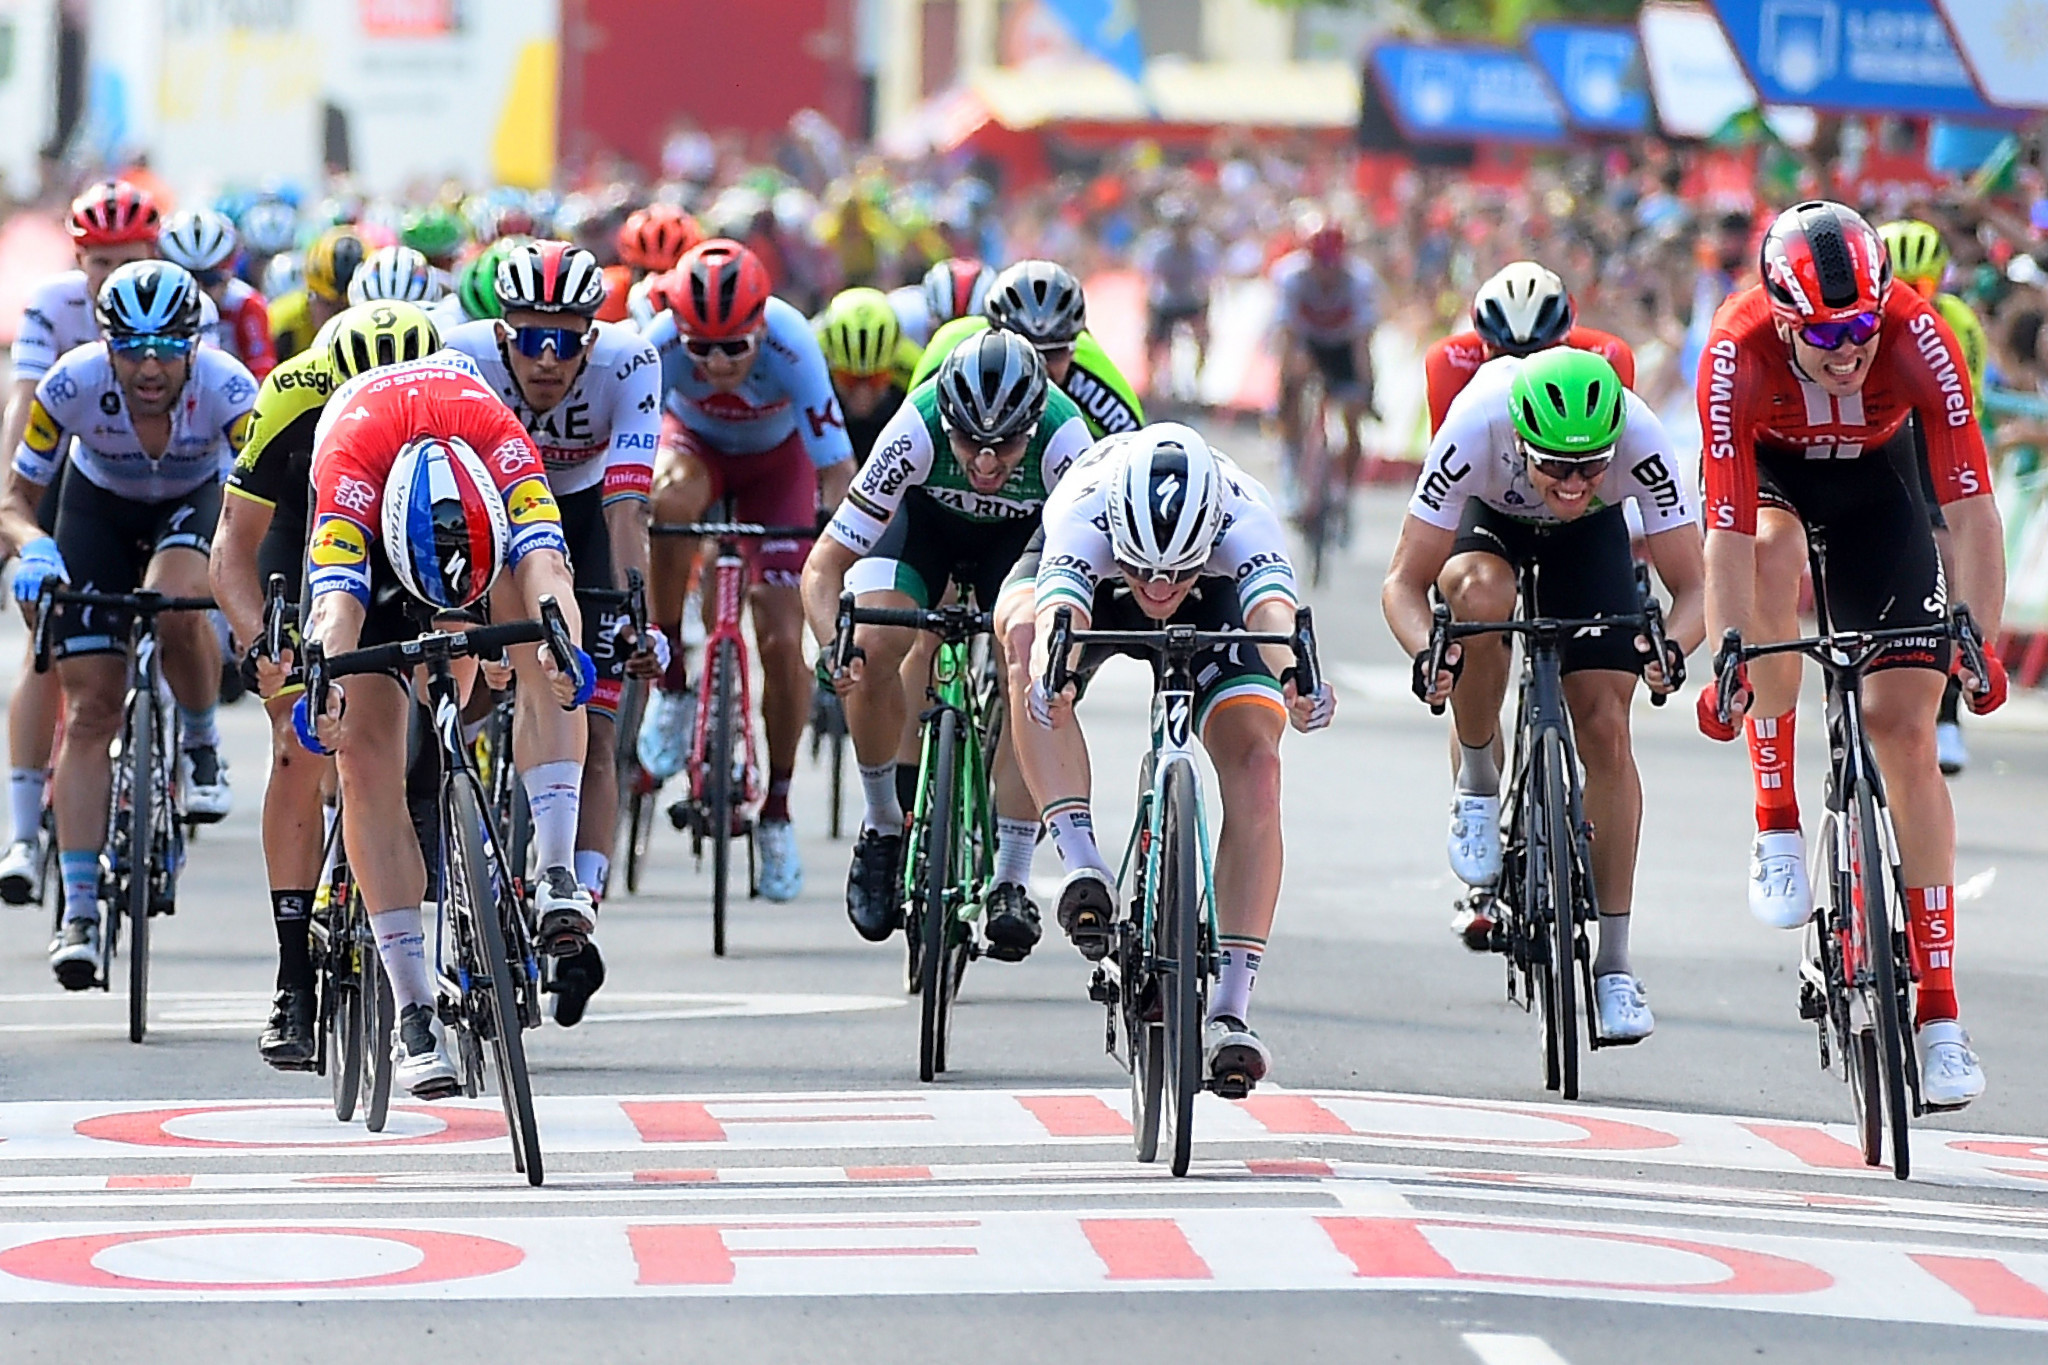 Jakobsen earns narrow victory to win first Grand Tour stage at Vuelta a España